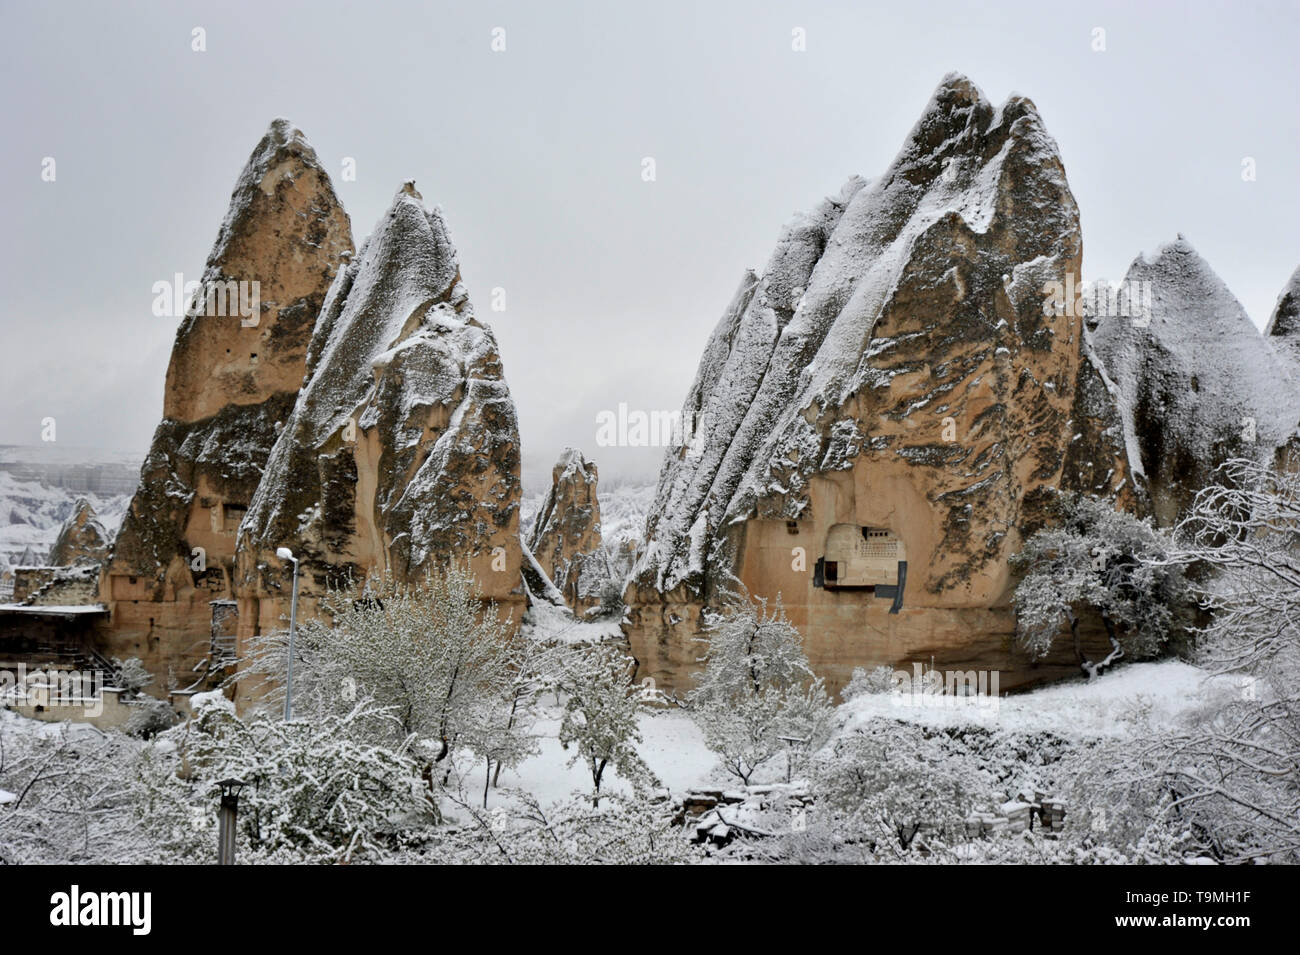 Unusual natural stone formations with snow in Goreme in the Cappadocia region of Turkey Stock Photo